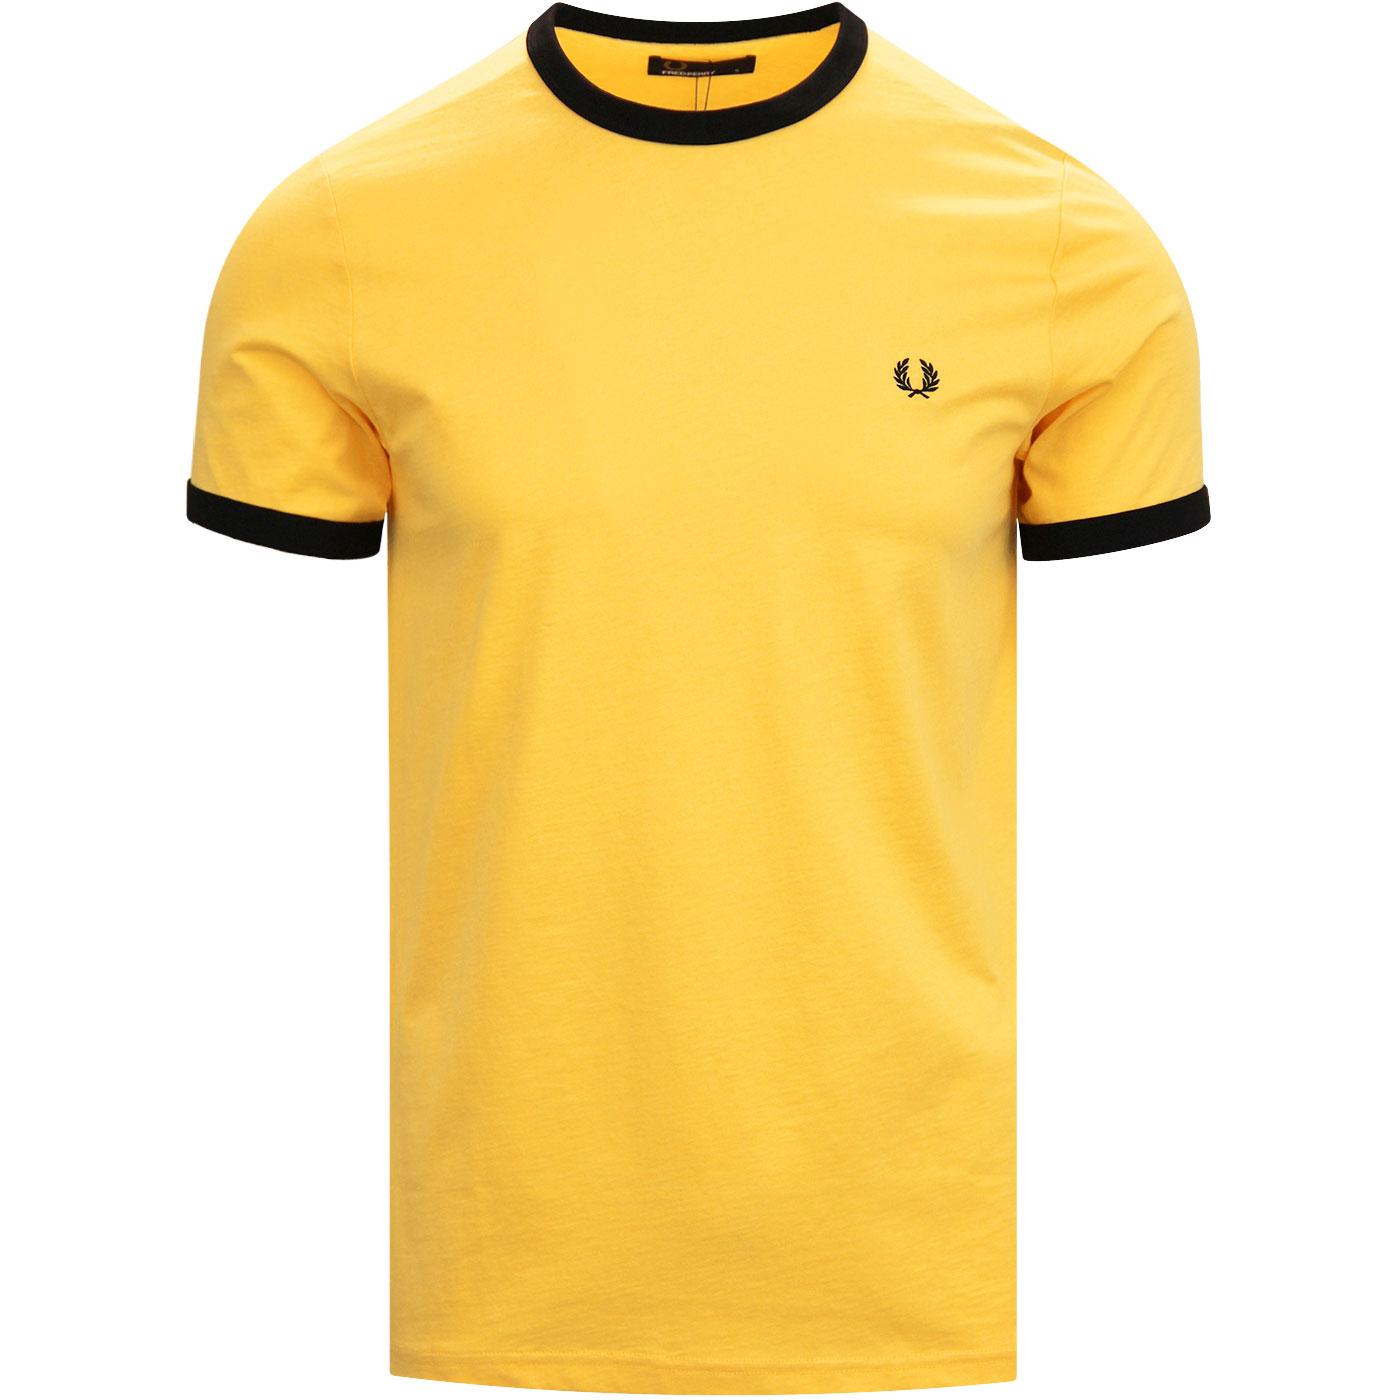 FRED PERRY Retro Crew Ringer Tee in Electric Yellow